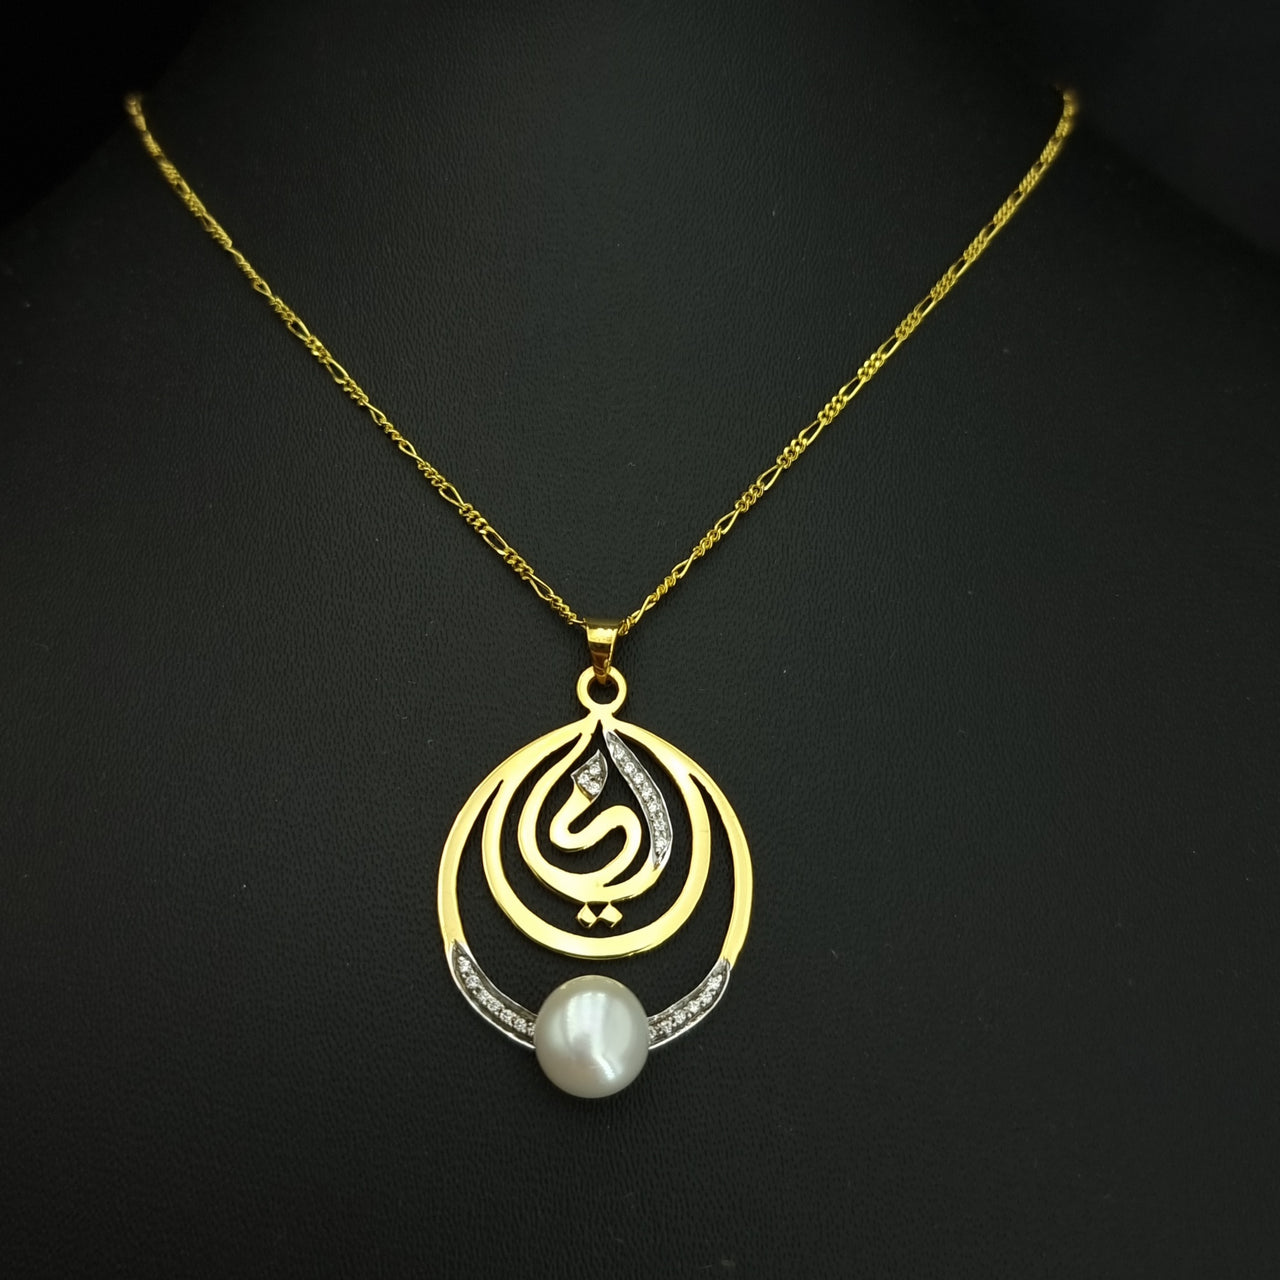 Mum (امي) Freshwater Pearl Necklace